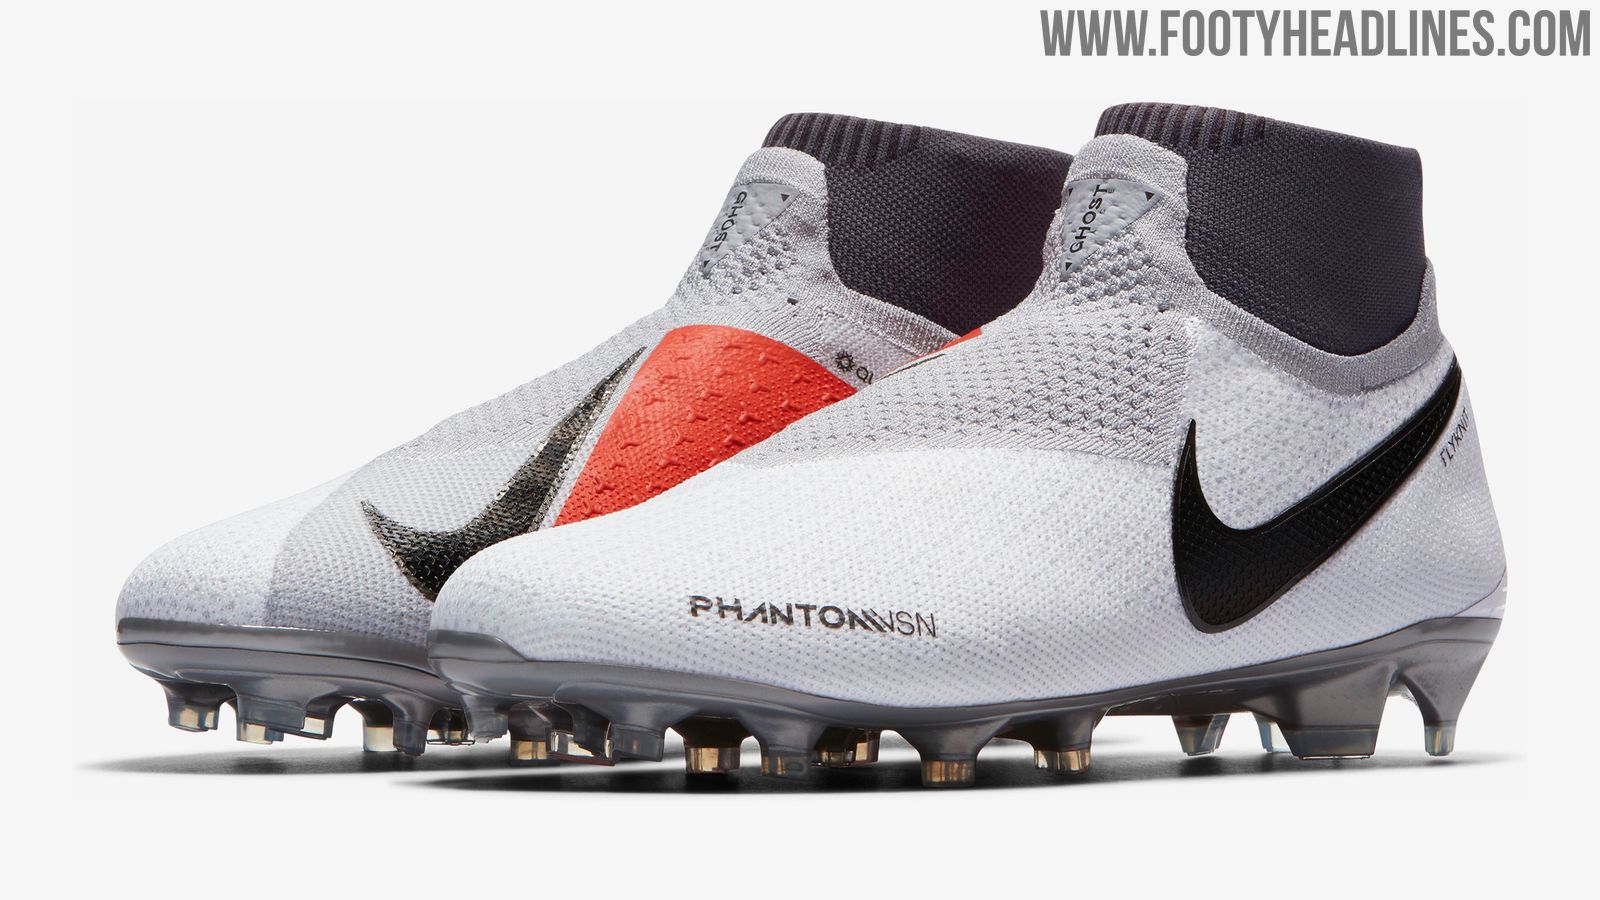 herder In tennis Here Are All 9 Nike Phantom Vision Boots Leaked / Released So Far - Footy  Headlines